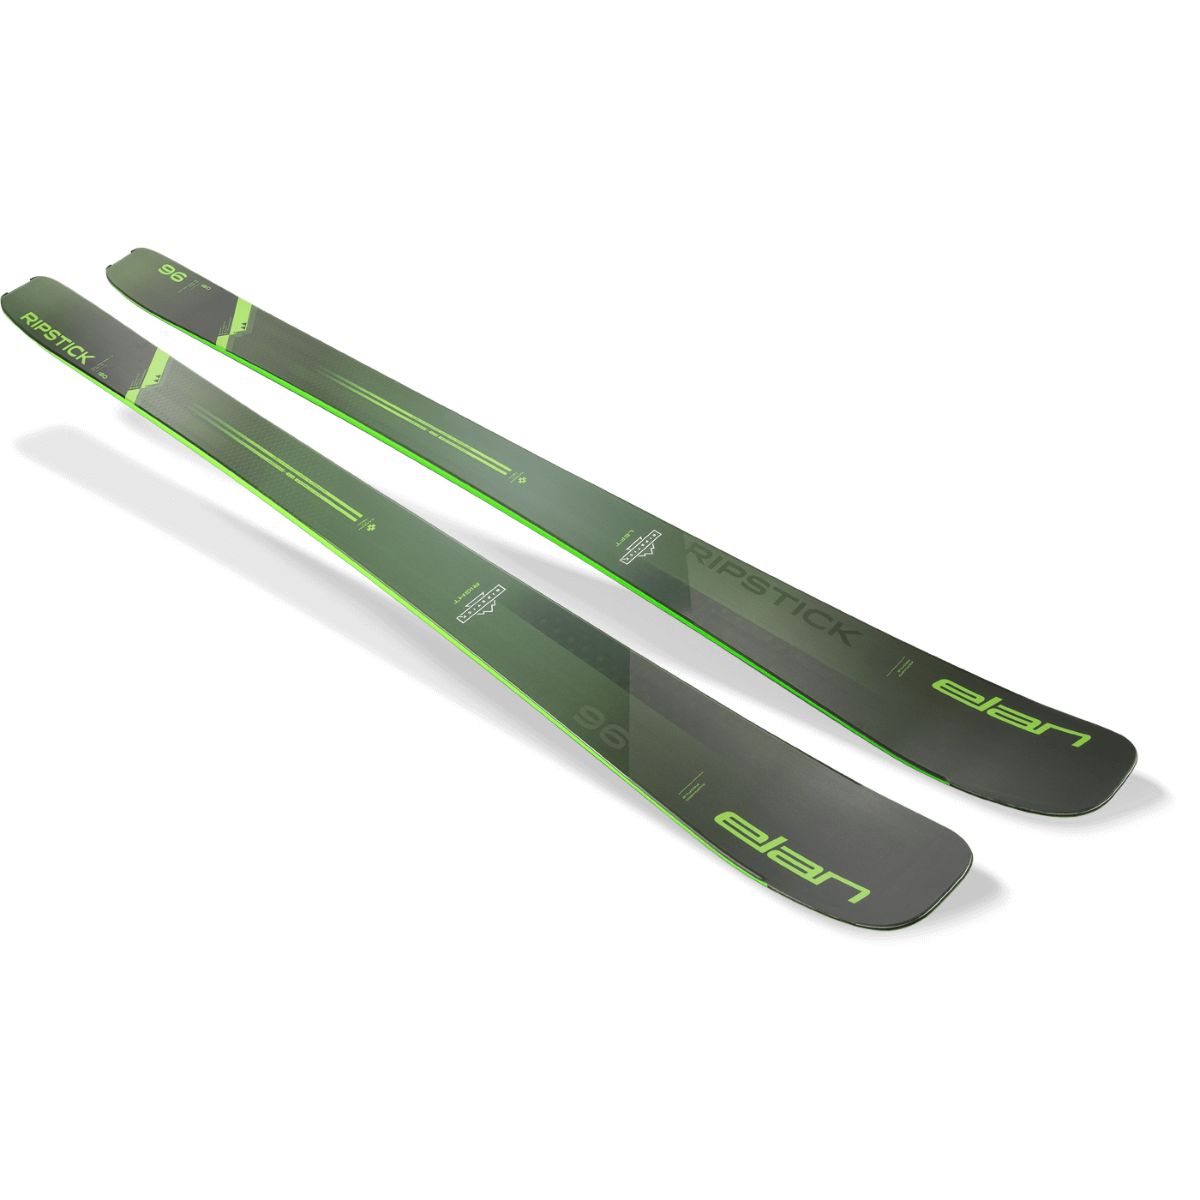 Best All-Mountain Versatility Excellent Flotation Powerful Edge Grip Smooth Turn Entry & Exit Playful & Power Rebound Stability at any speed, in any turn shape